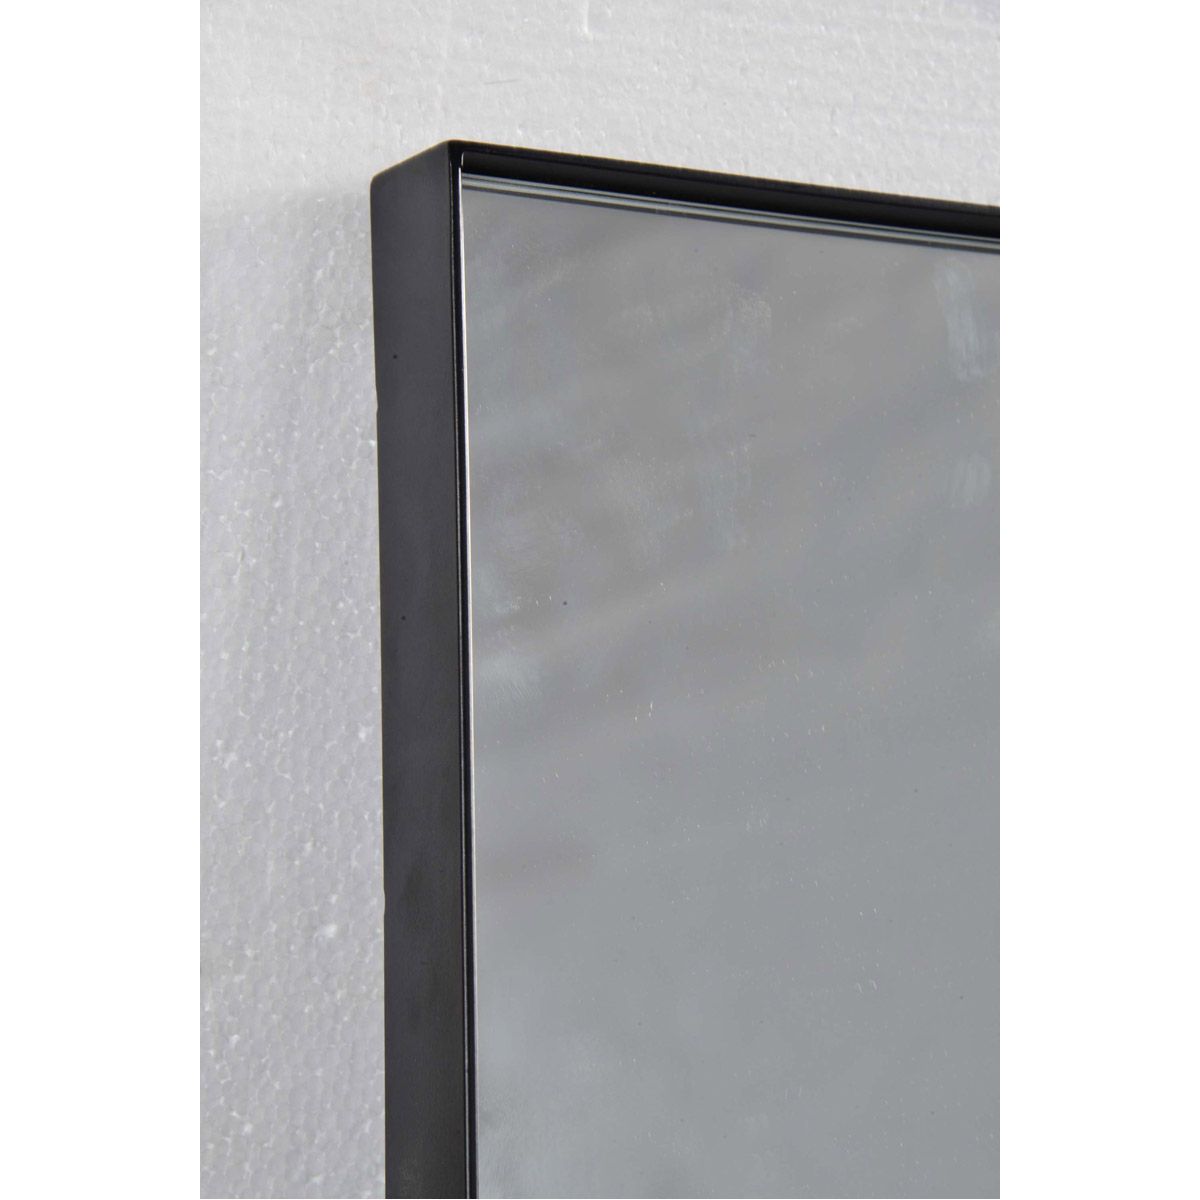 Ebay Pertaining To Best And Newest Matte Black Square Wall Mirrors (View 6 of 15)